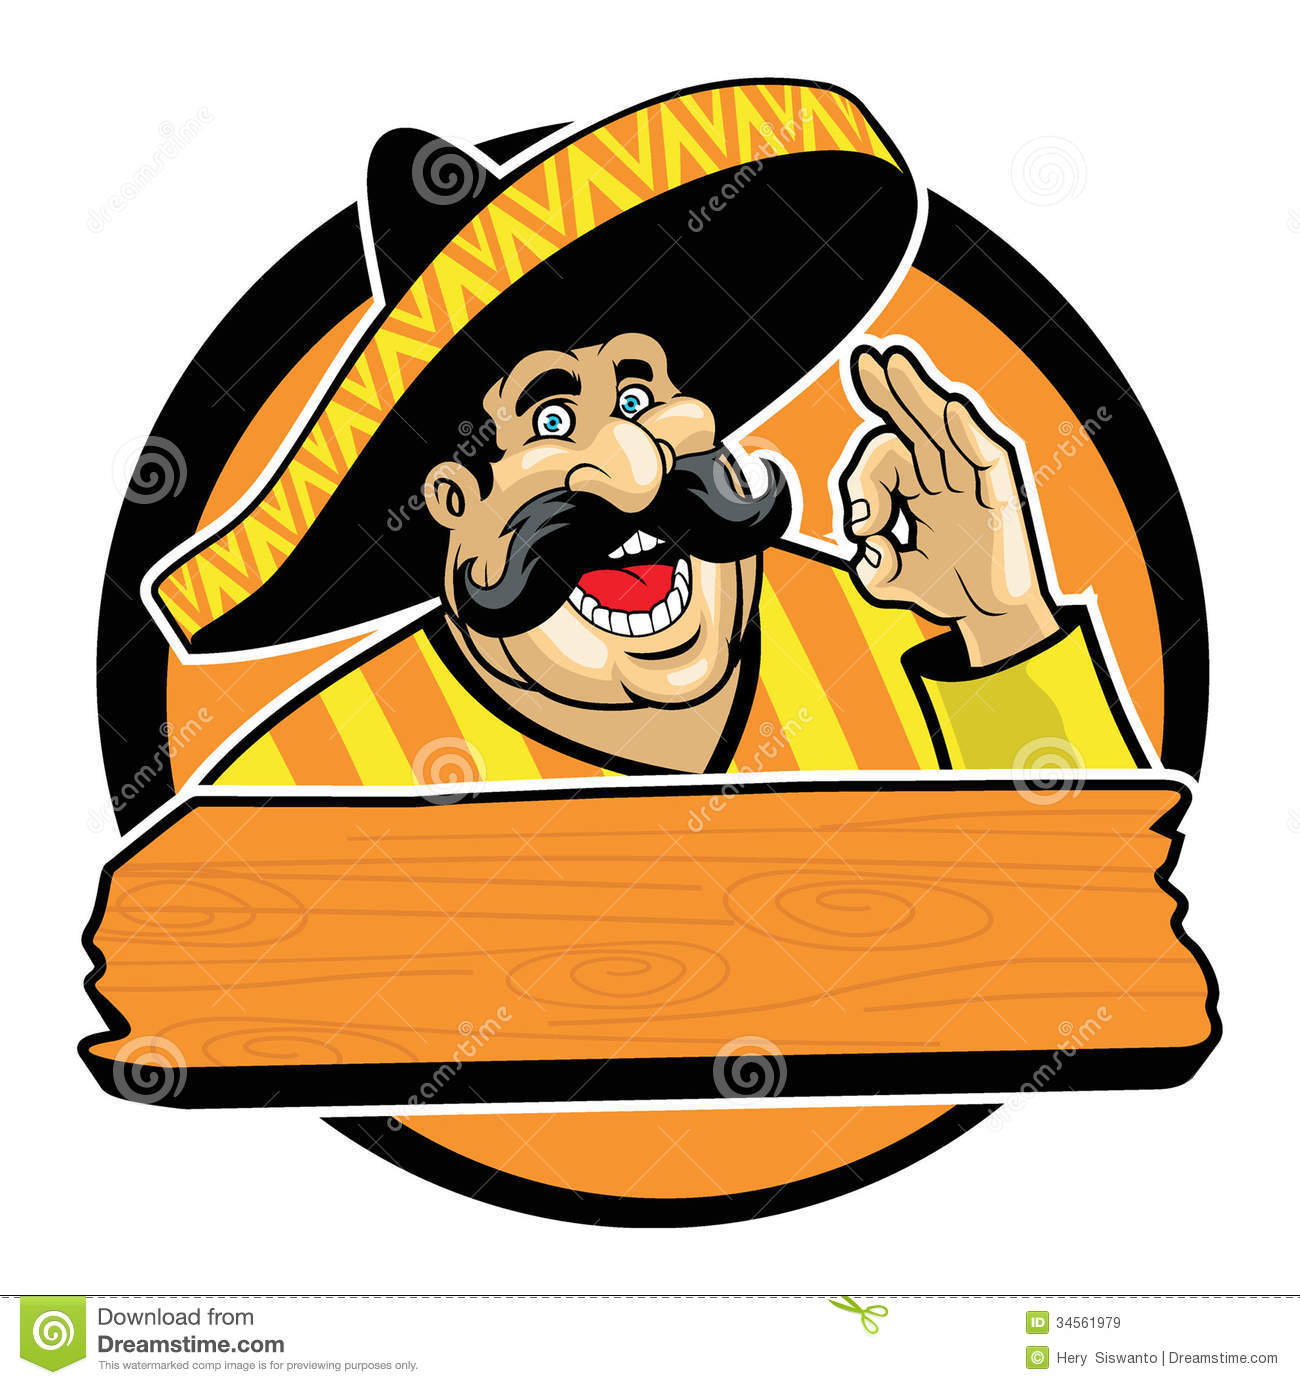 Mexican With Okay Sign Royalty Free Stock Images   Image  34561979